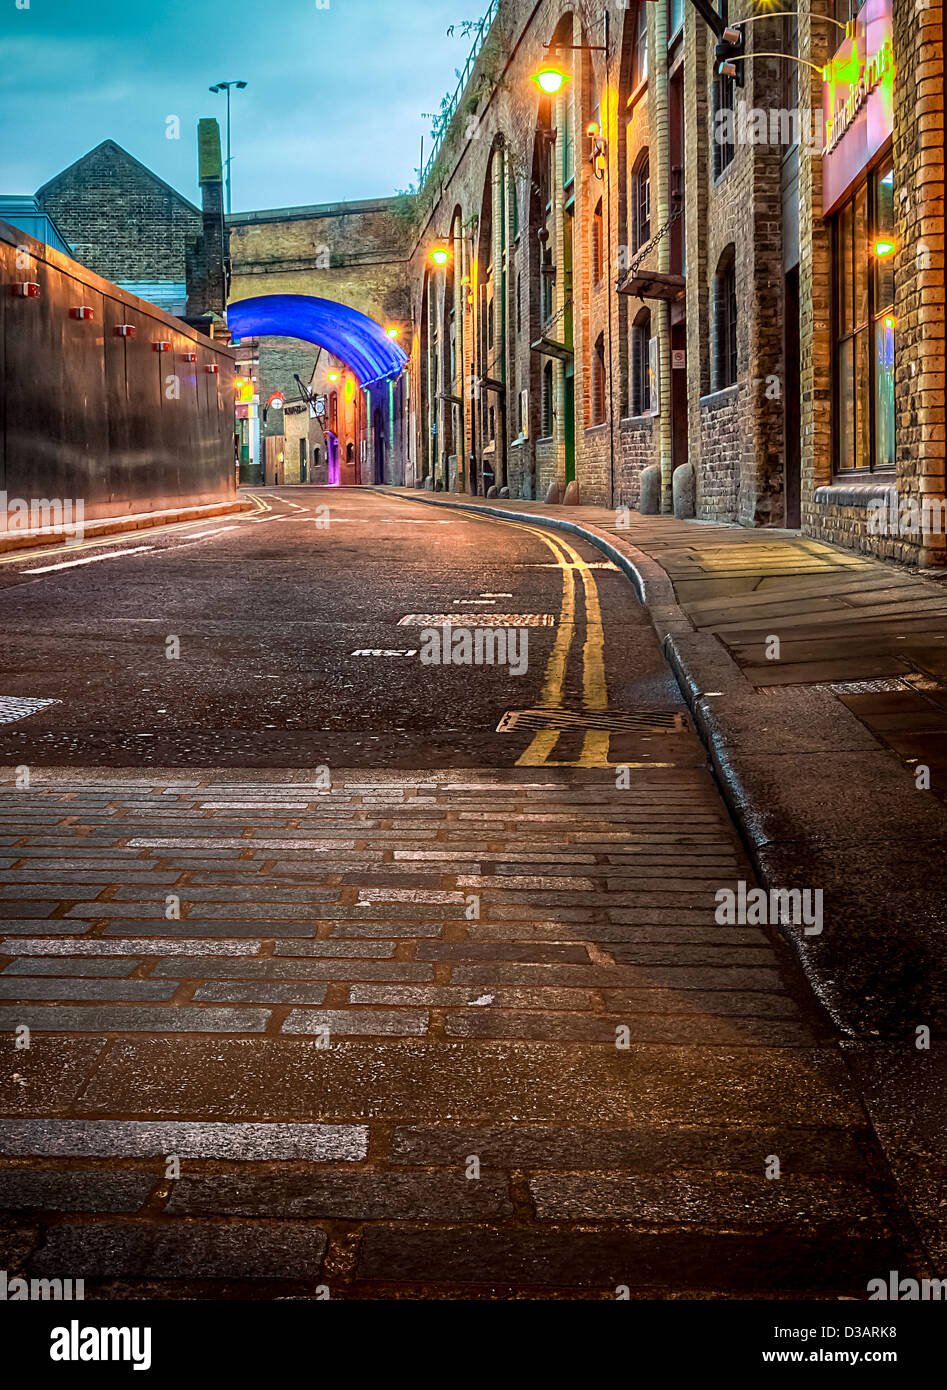 A london street HDR Stock Photo